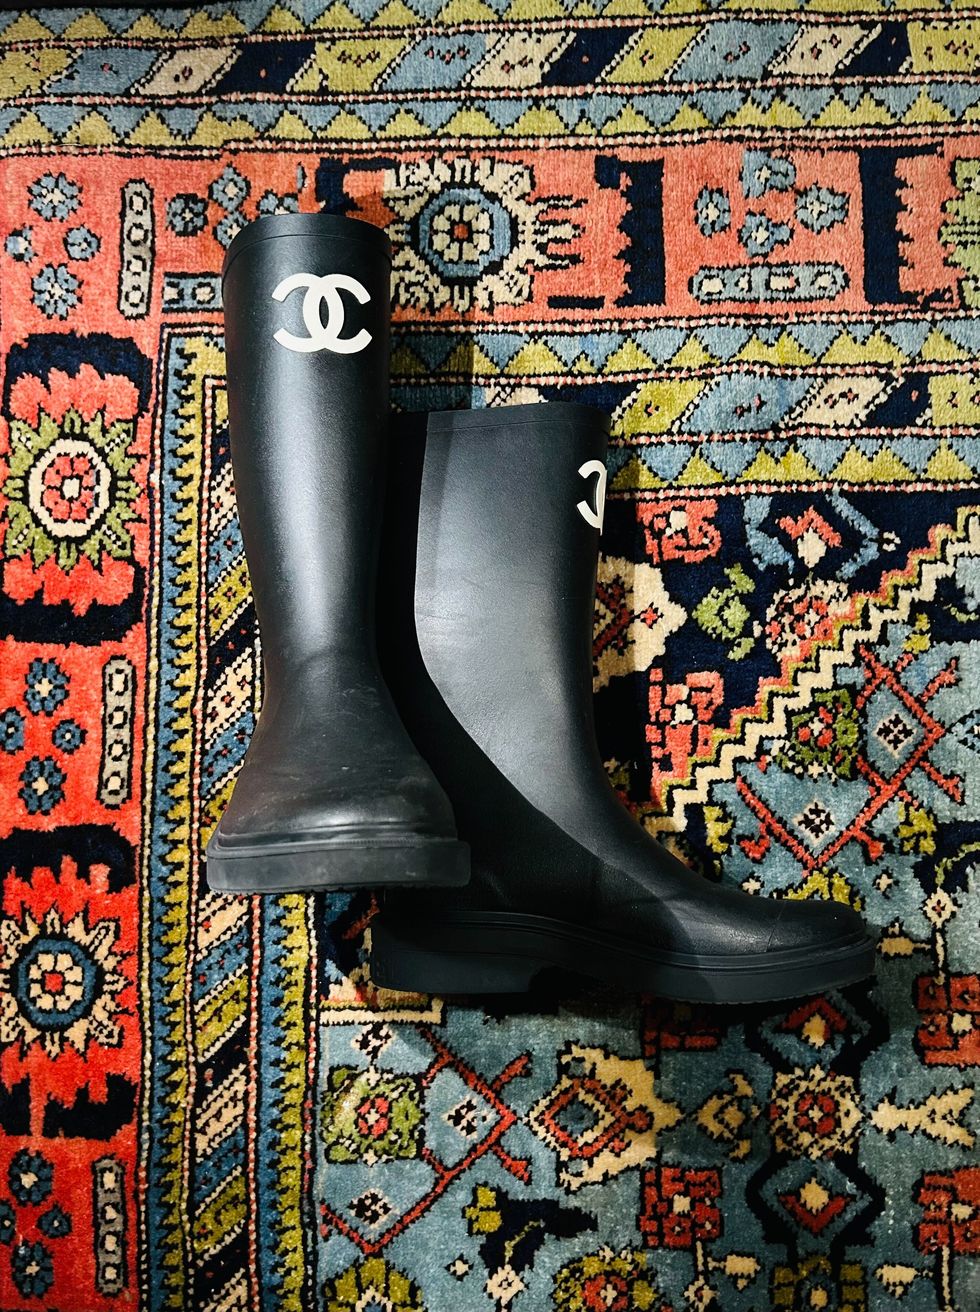 a pair of black boots on a colorful surface